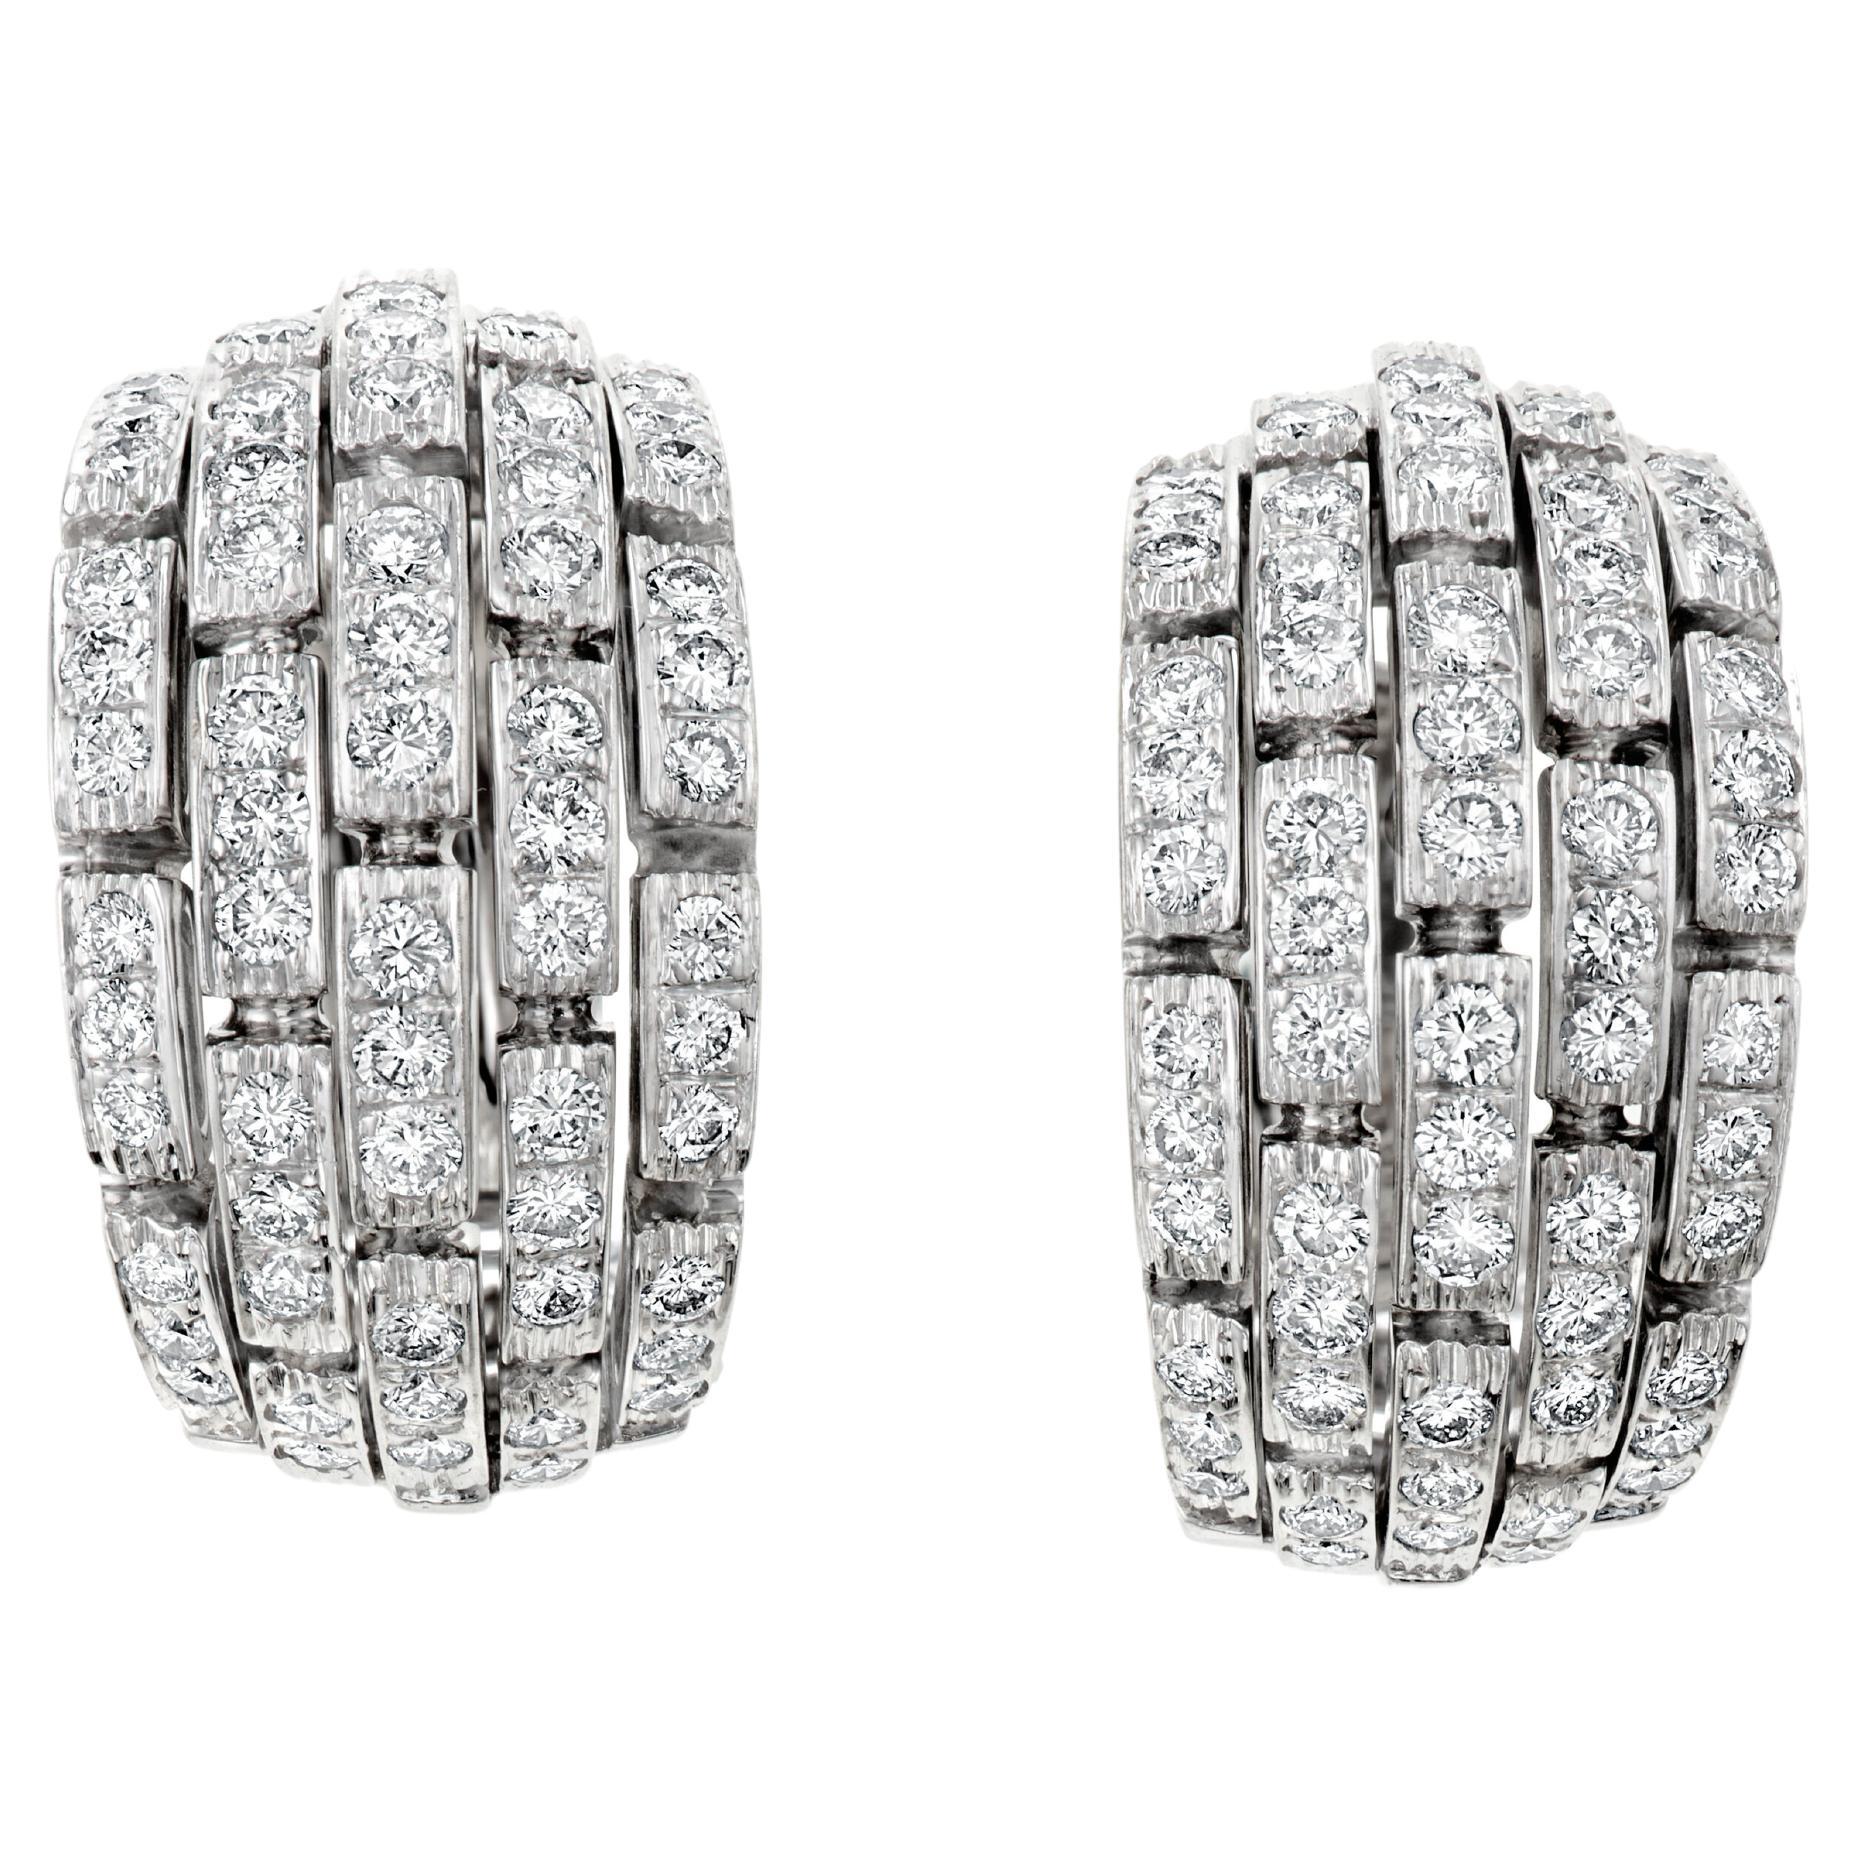 Cartier Diamond and White Gold 'Panther Figaro' Earrings